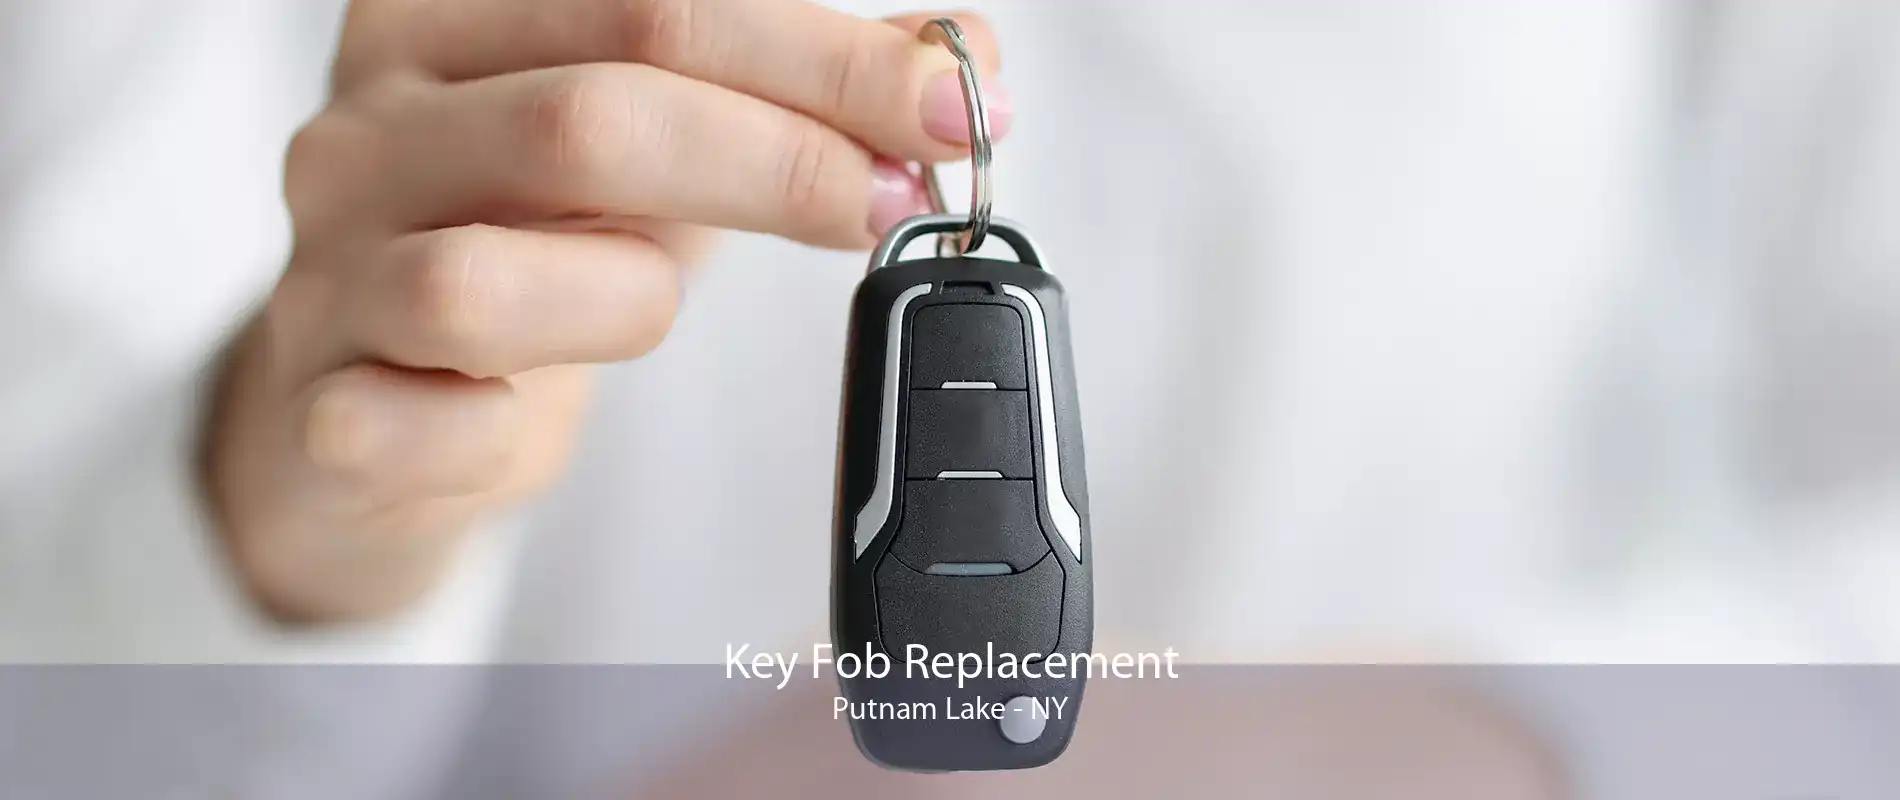 Key Fob Replacement Putnam Lake - NY